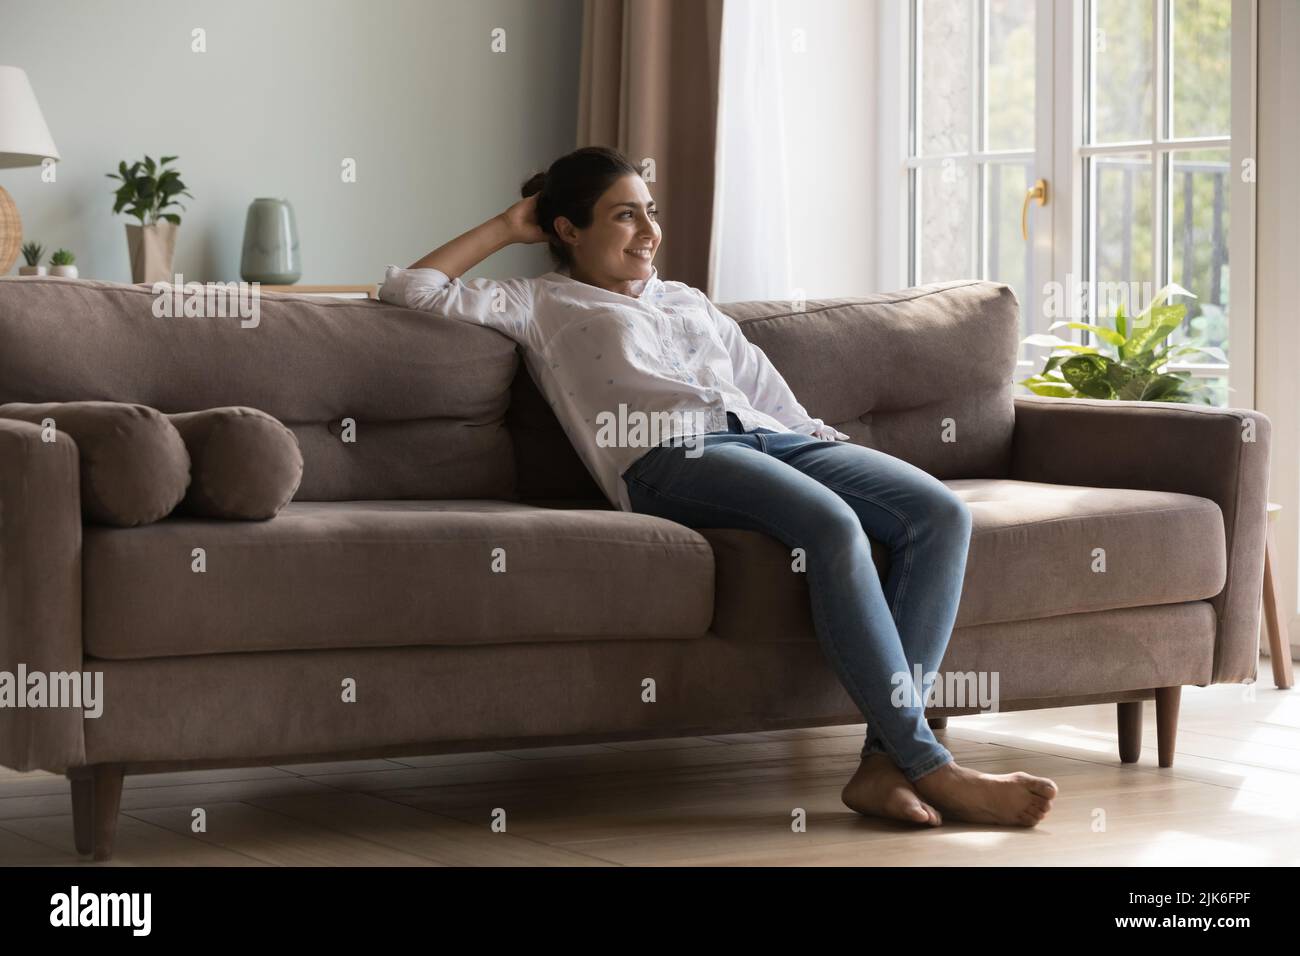 Cheerful carefree young Indian woman enjoying relaxation co comfortable sofa Stock Photo